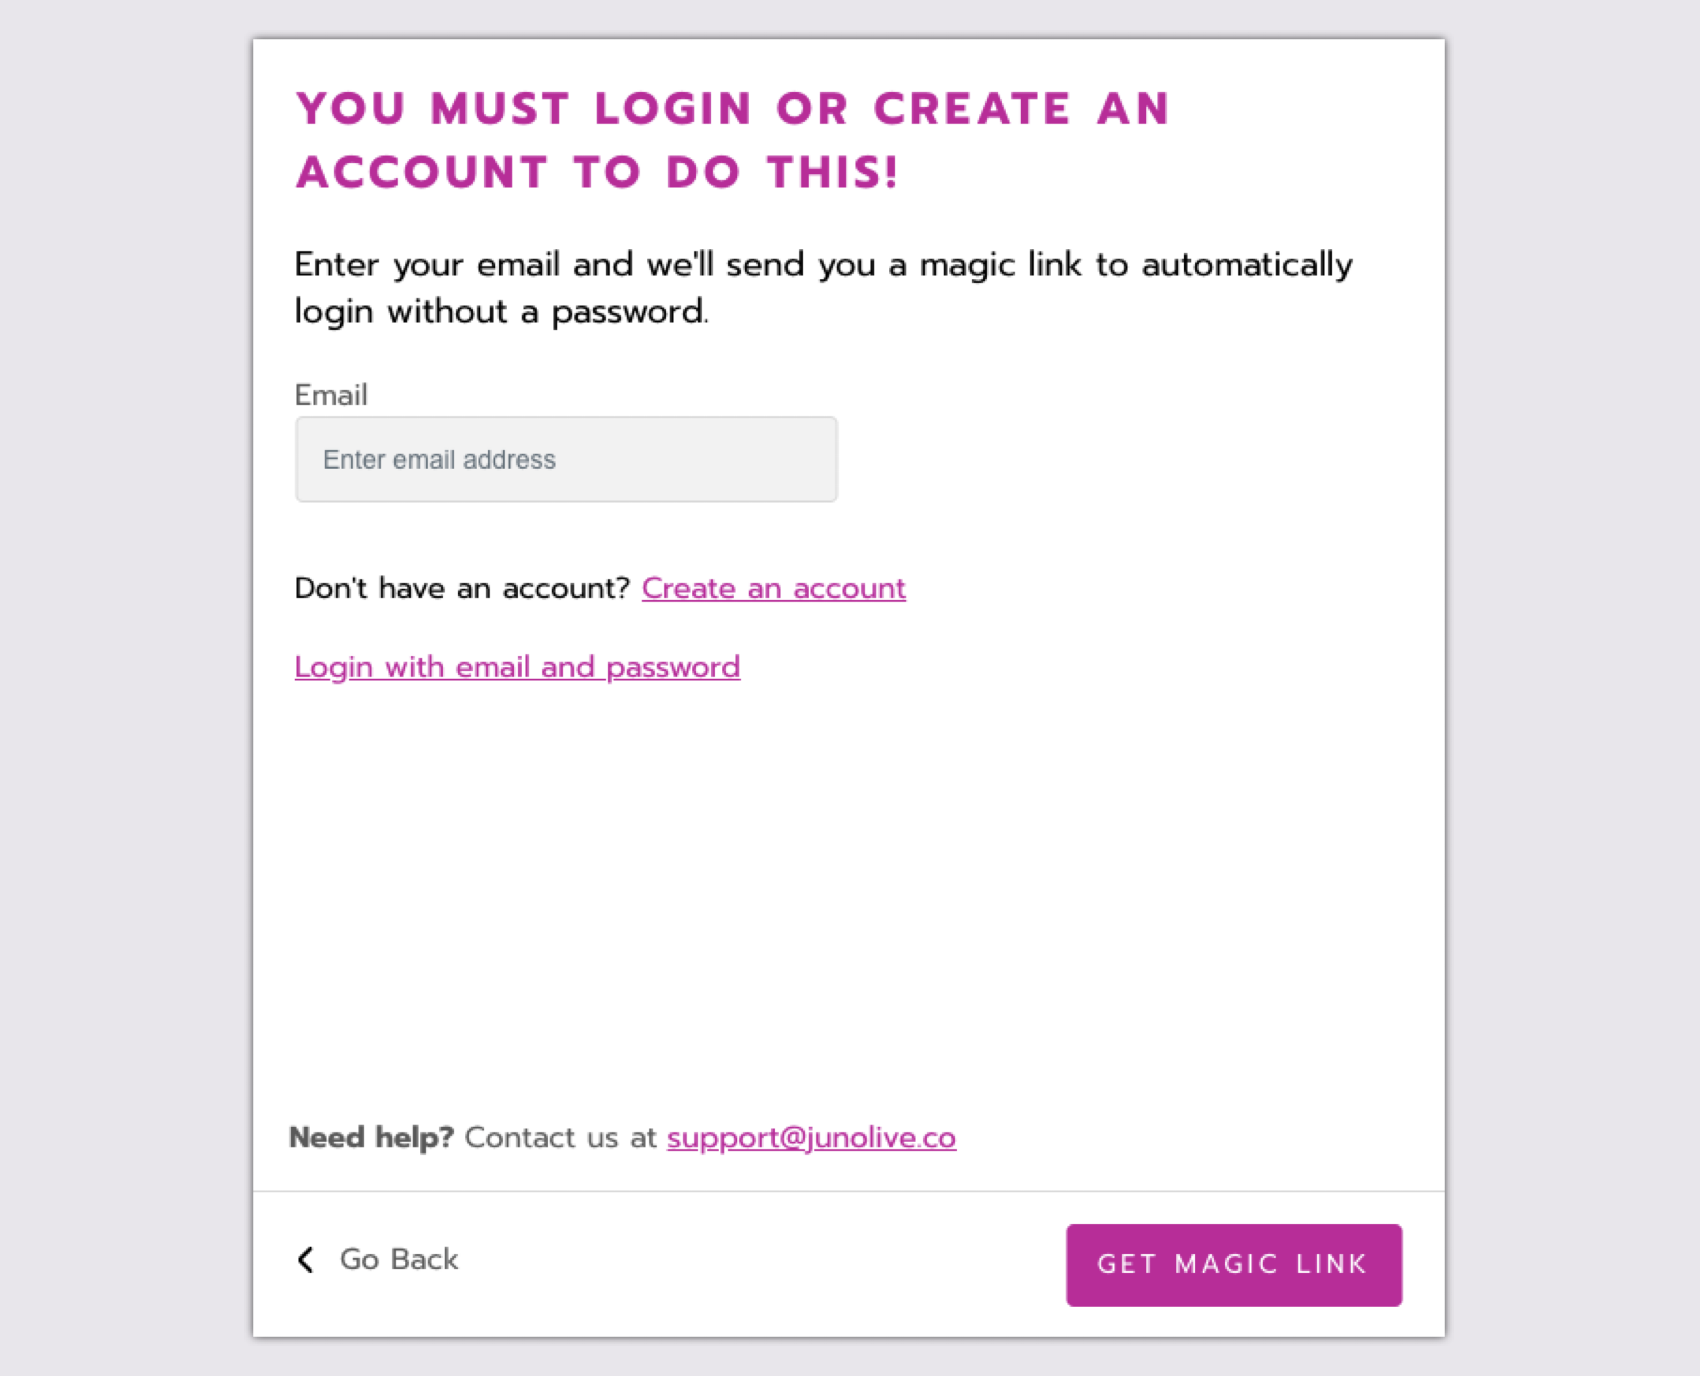 A dialog tells users You must login or create an account to do this, then allows login with a magic link or password.